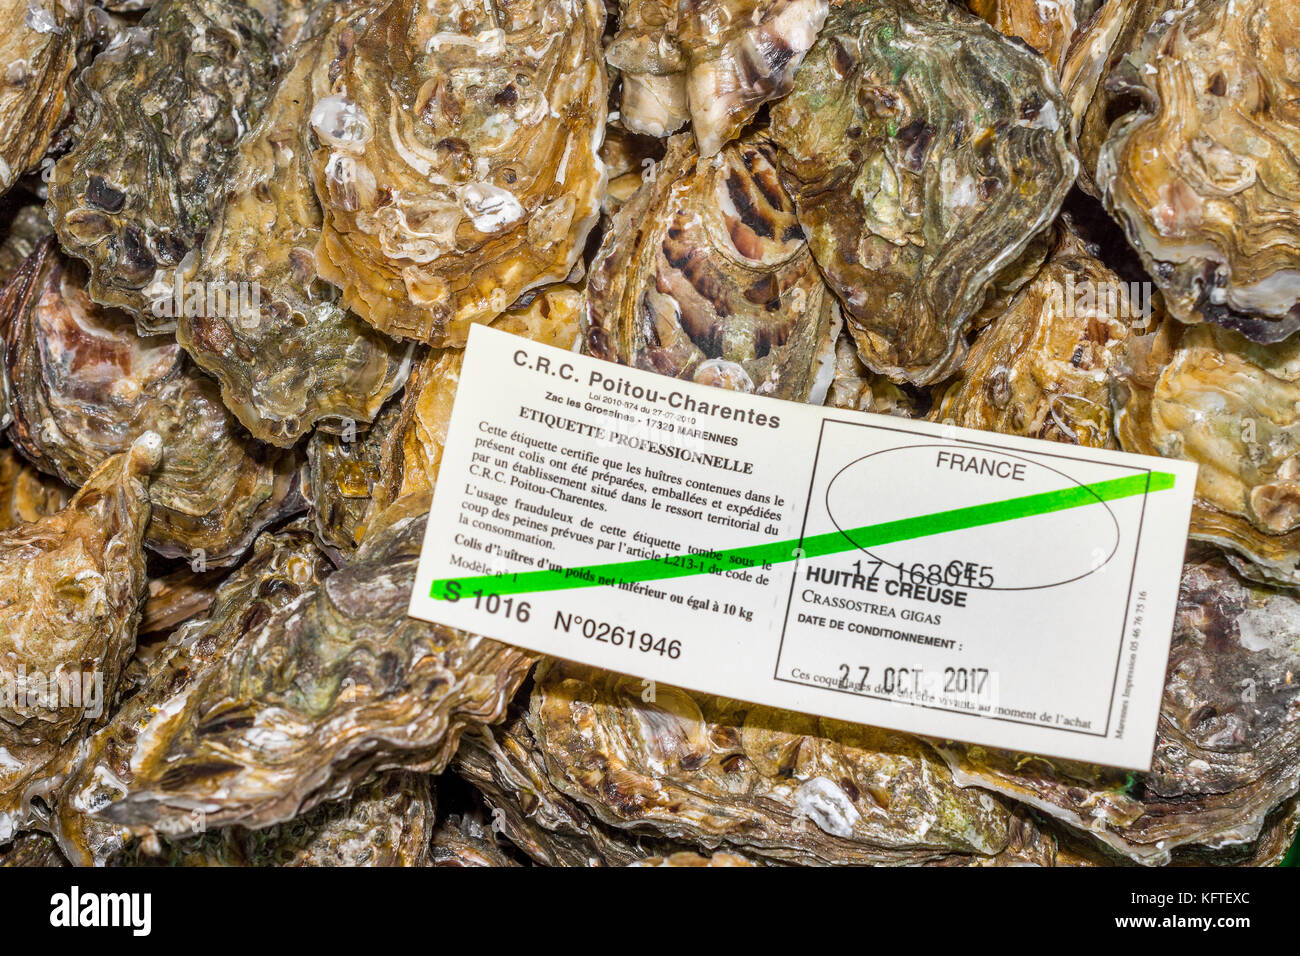 Certificate of quality and freshness for oysters - France. Stock Photo